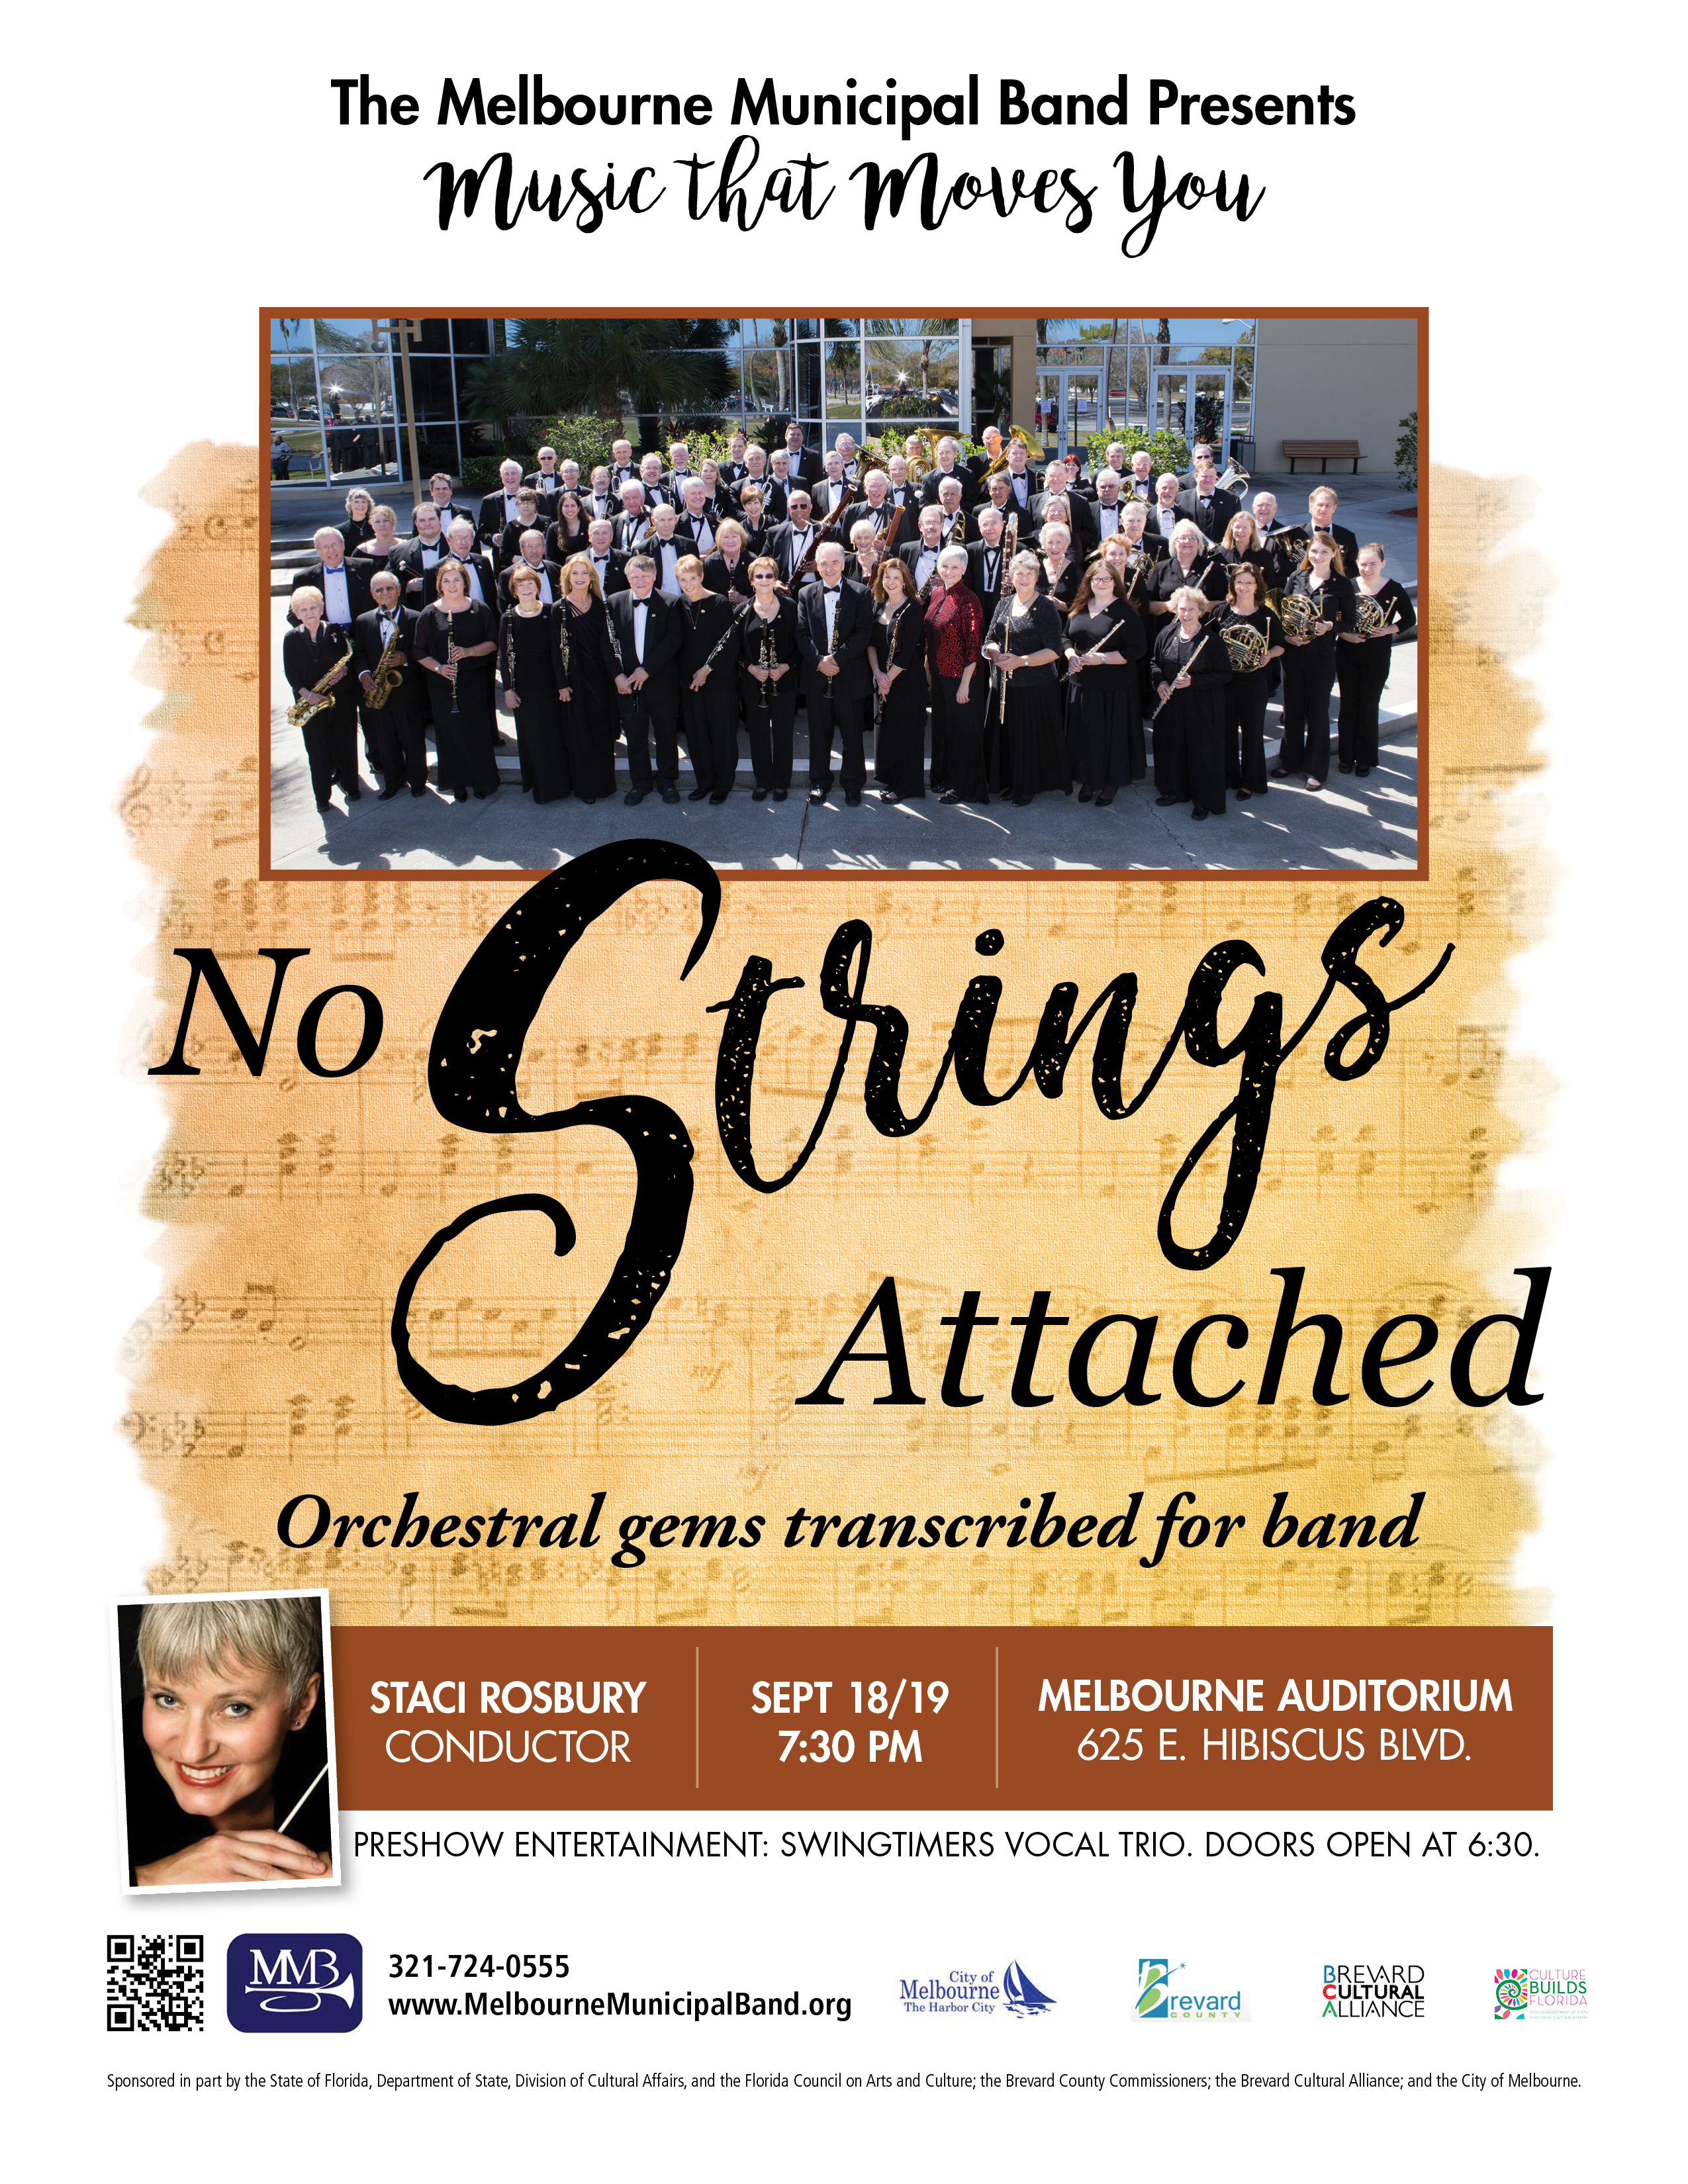 No Strings Attached presented by The Melbourne Municipal Band